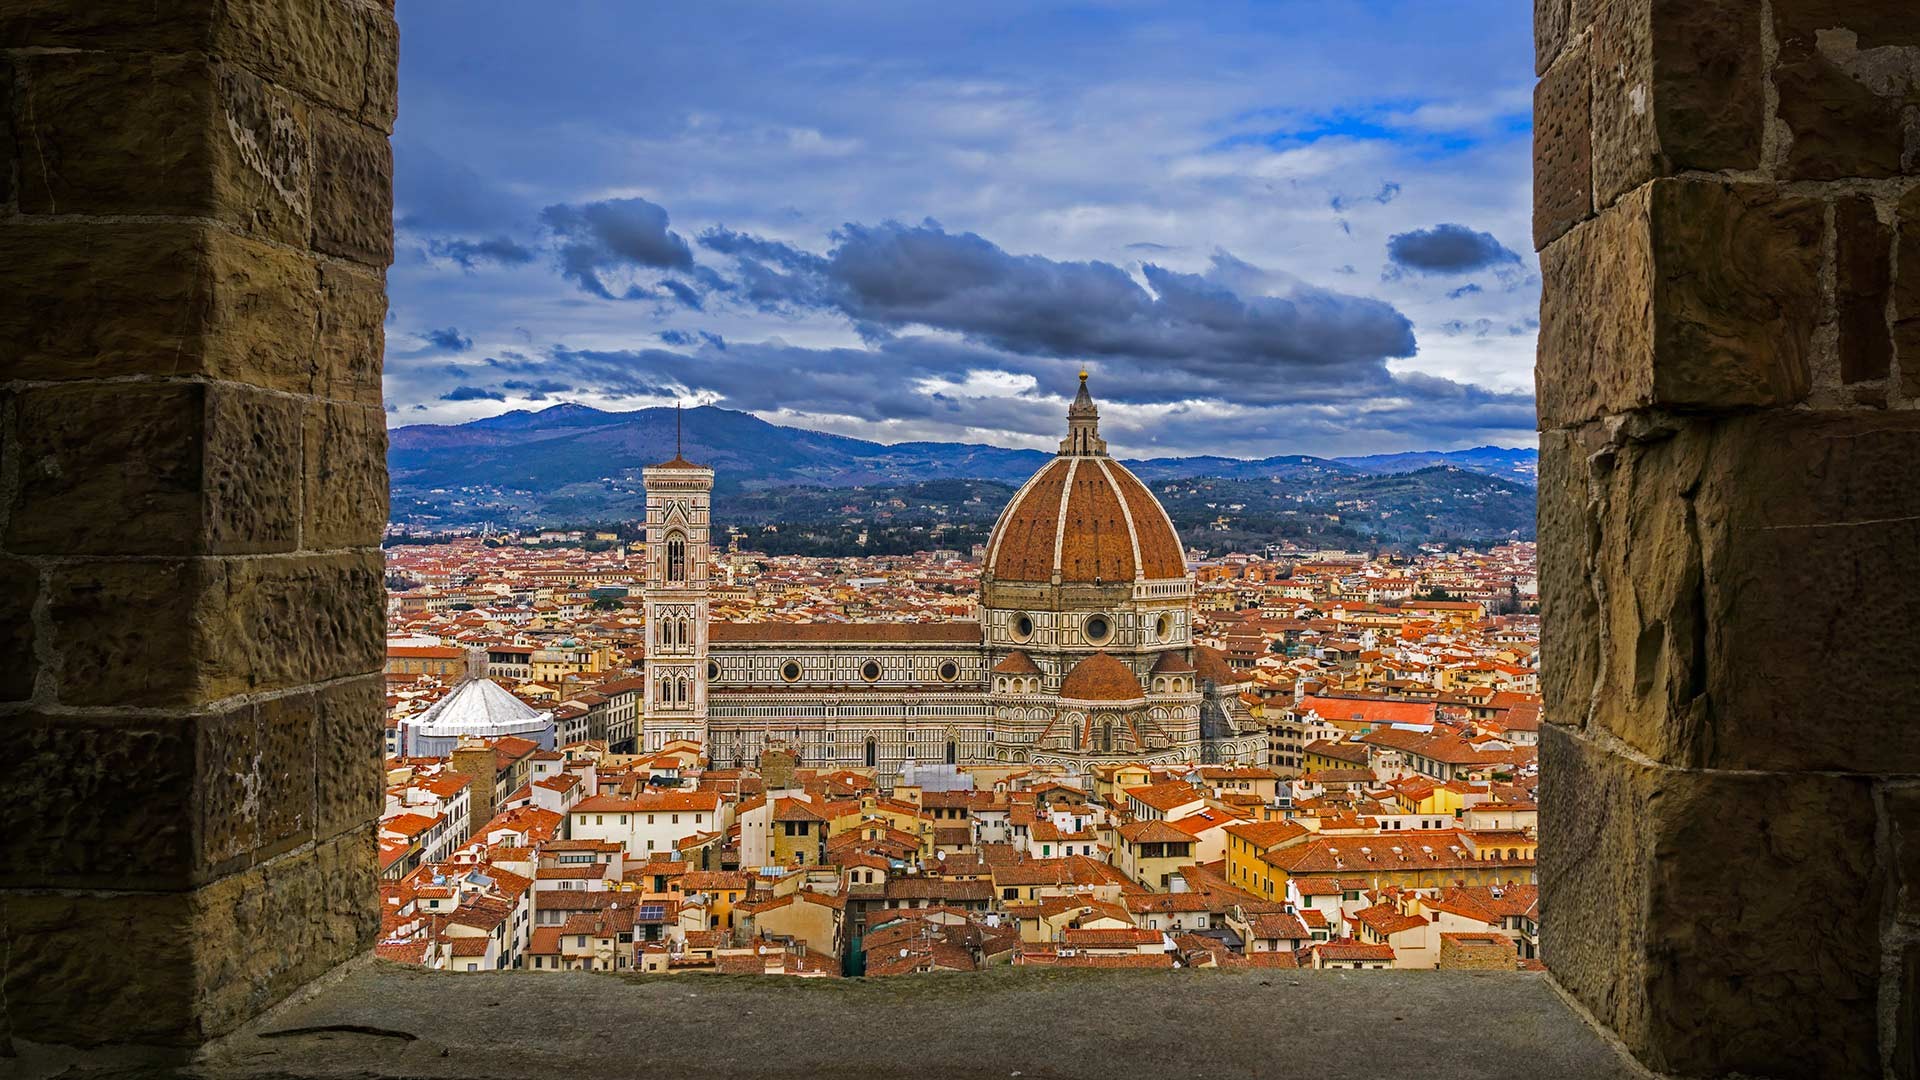 General 1920x1080 architecture building city bricks Florence Italy ancient church history old building window clouds rooftops hills